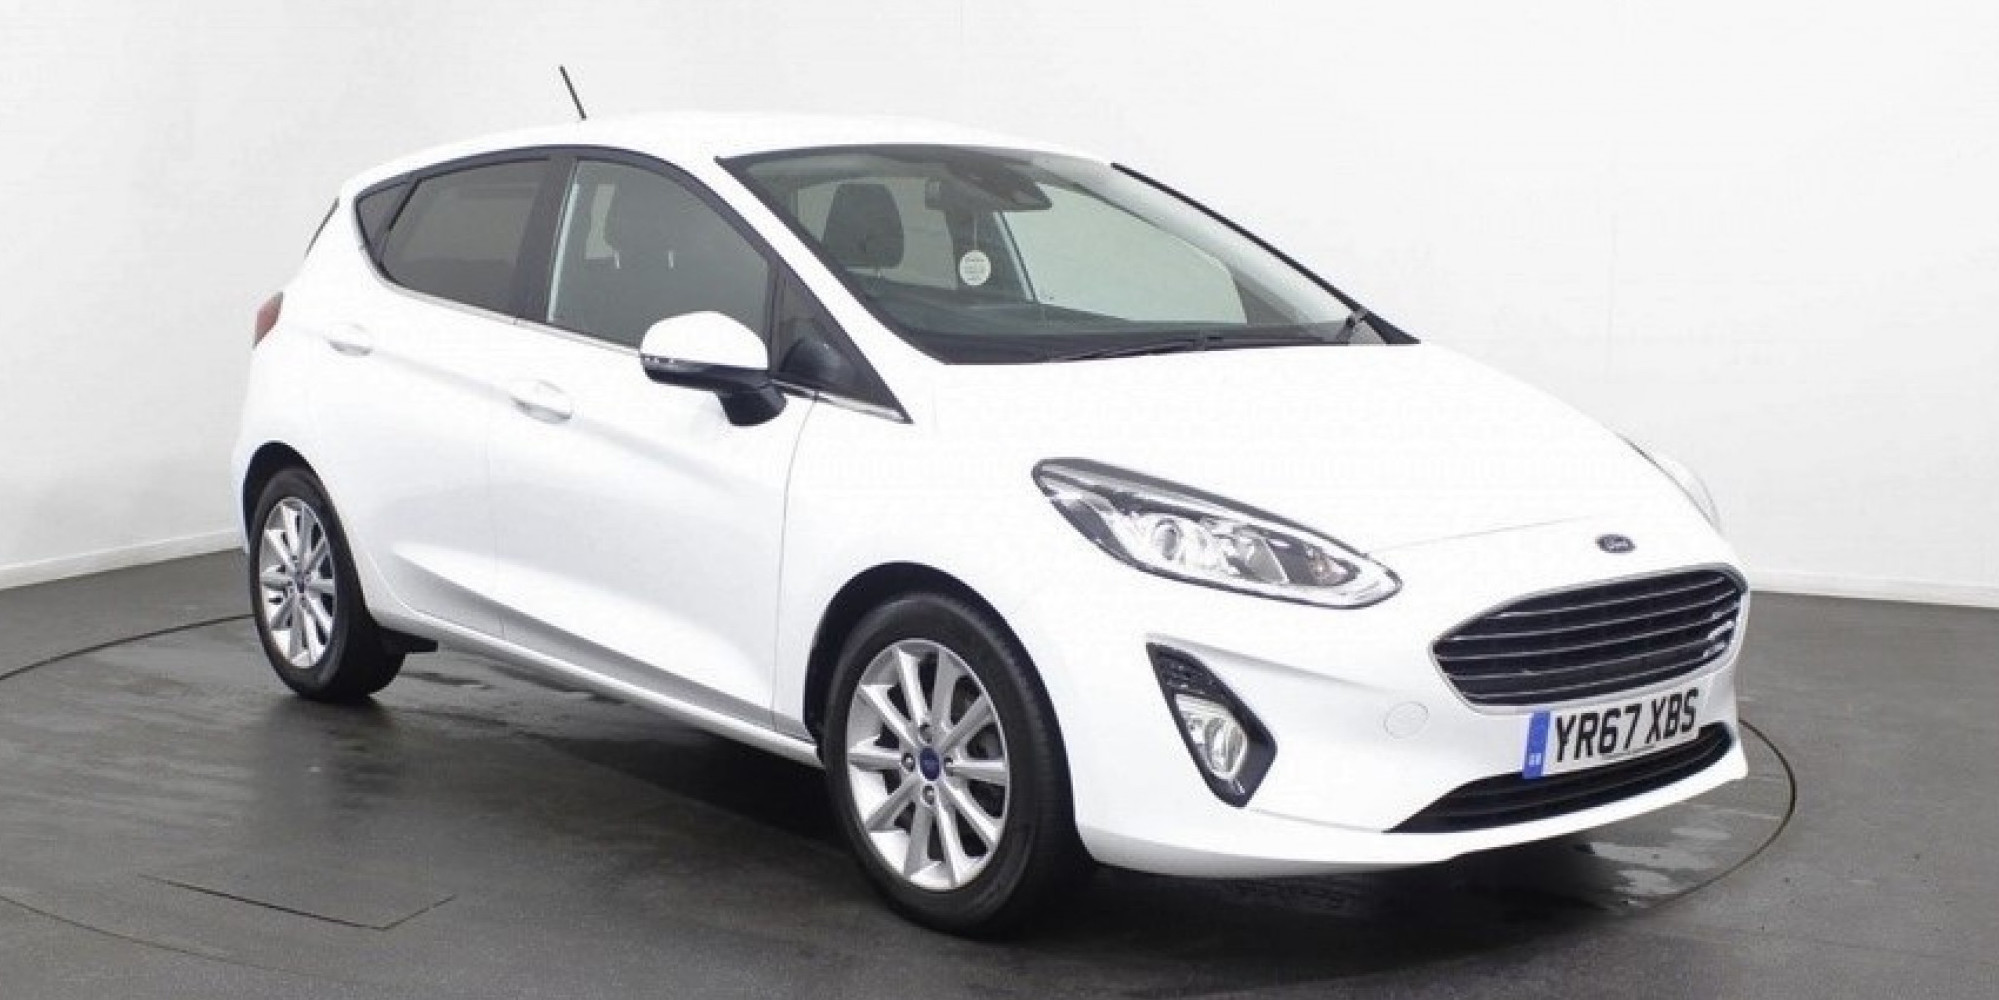 White Ford Fiesta parked in showroom, facing three-quarters right 